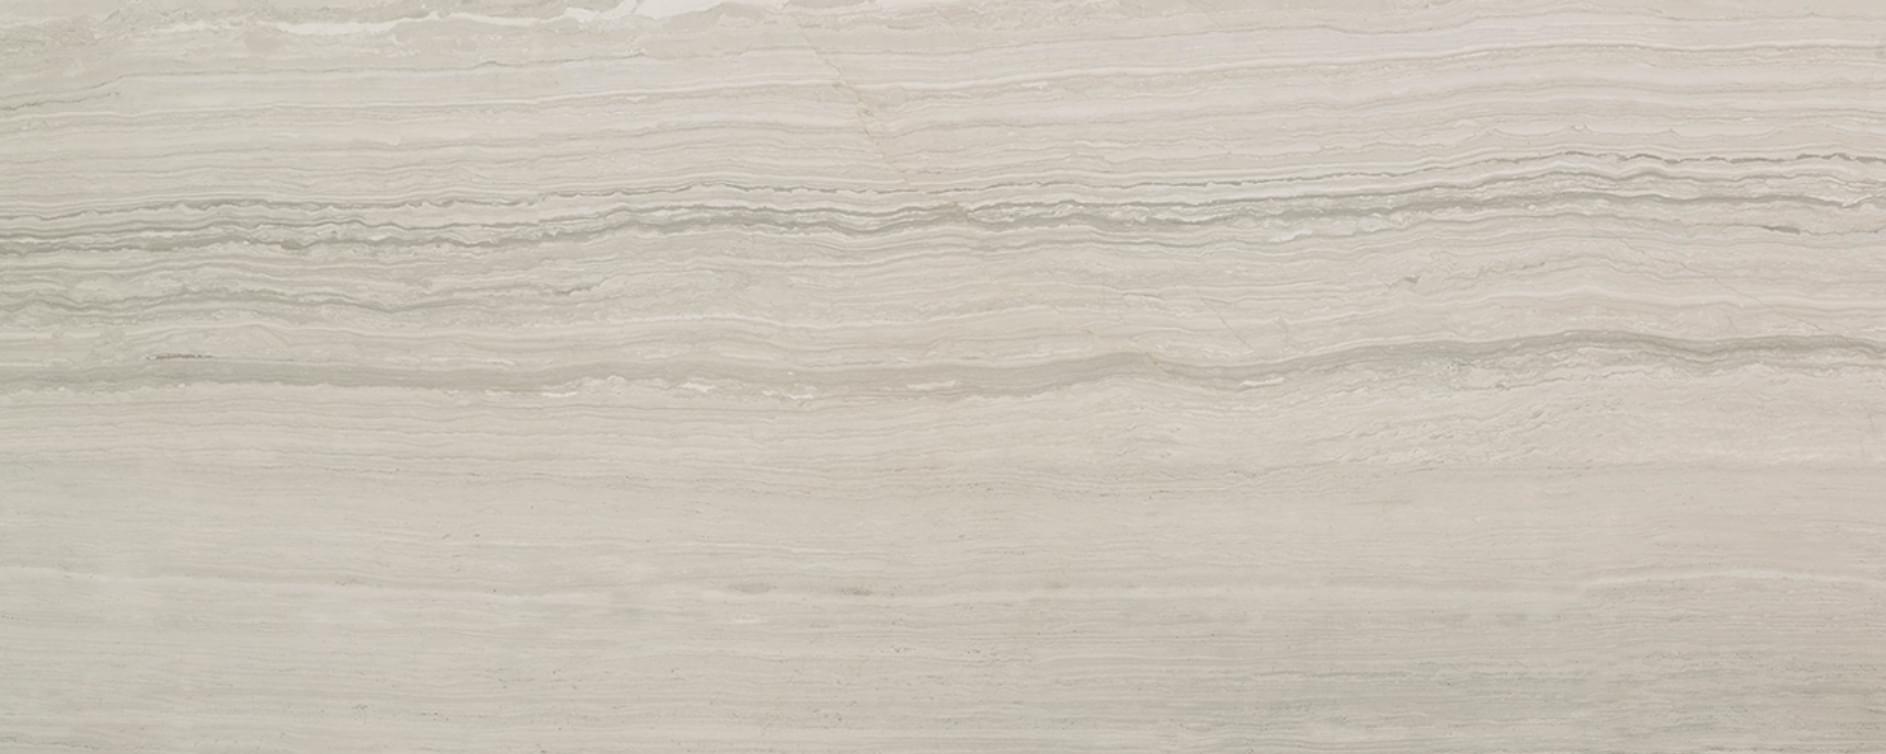 LAntic Colonial Natural Stone Silver Wood Classico Bioprot 40x80